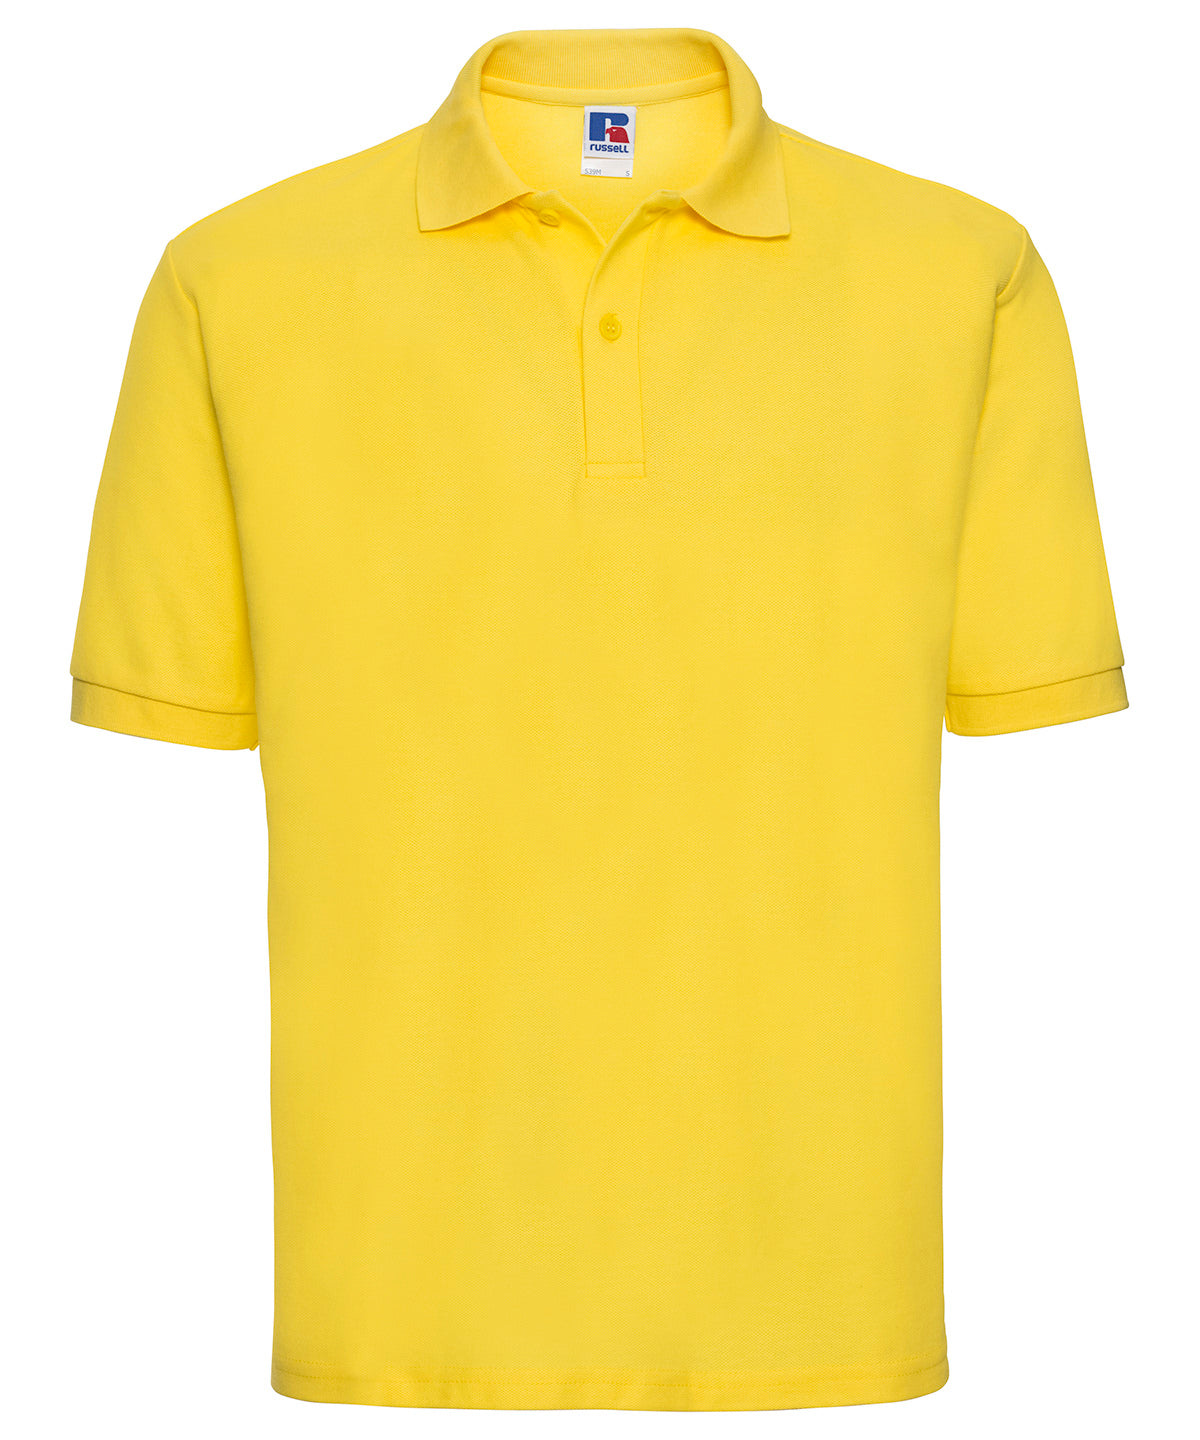 Russell Classic Polycotton Polo Yellow